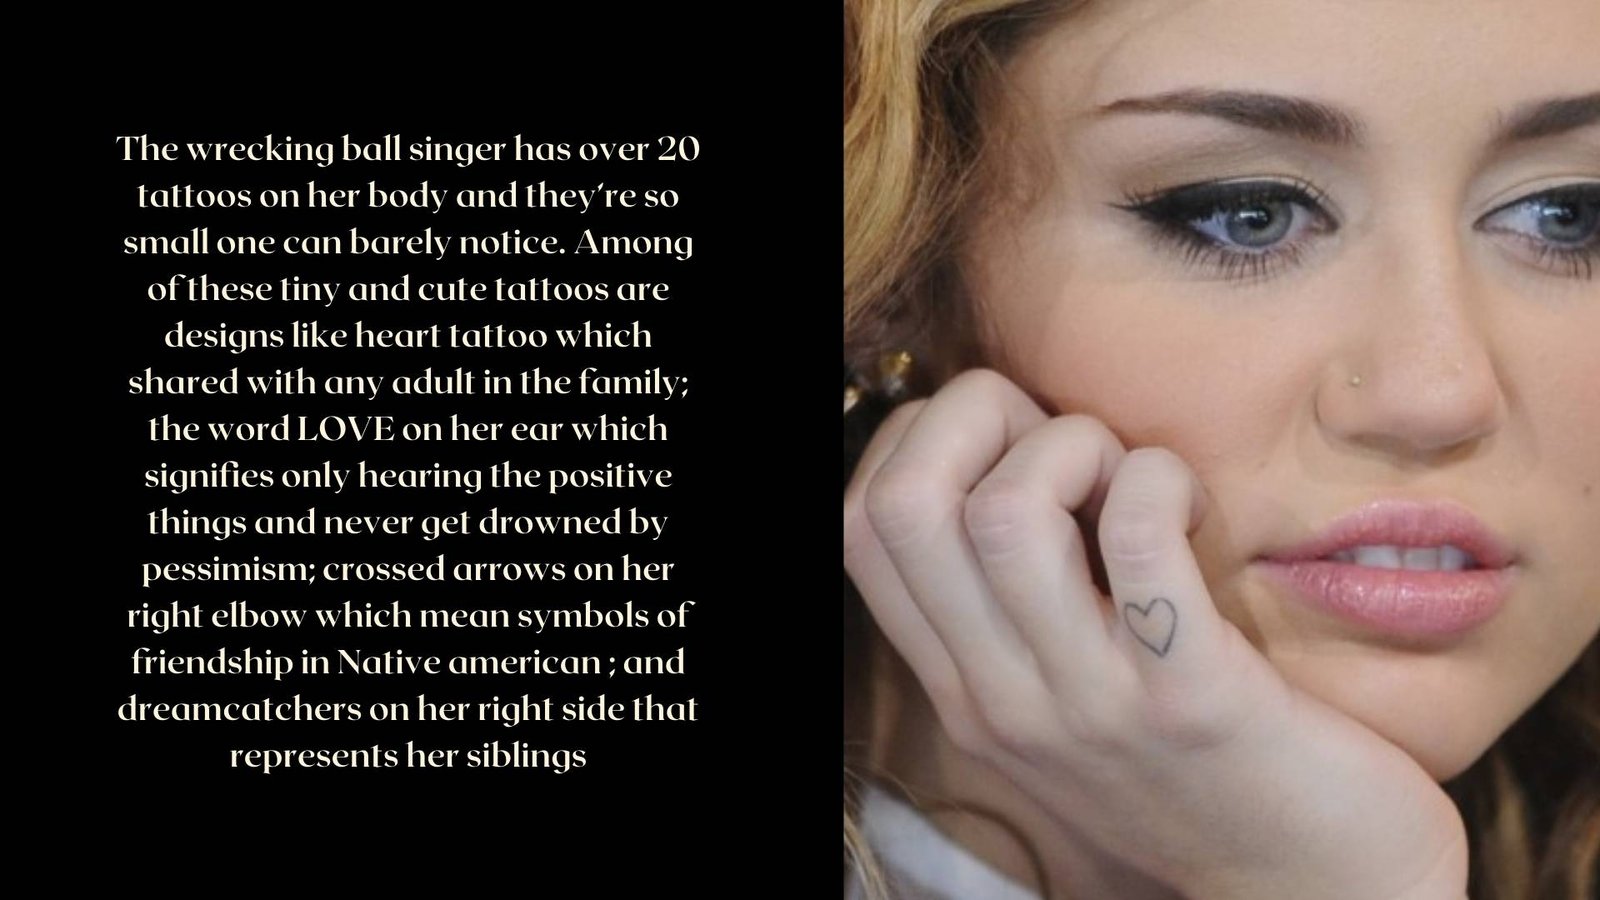 Miley cyrus’s Tattoos & Their Meanings